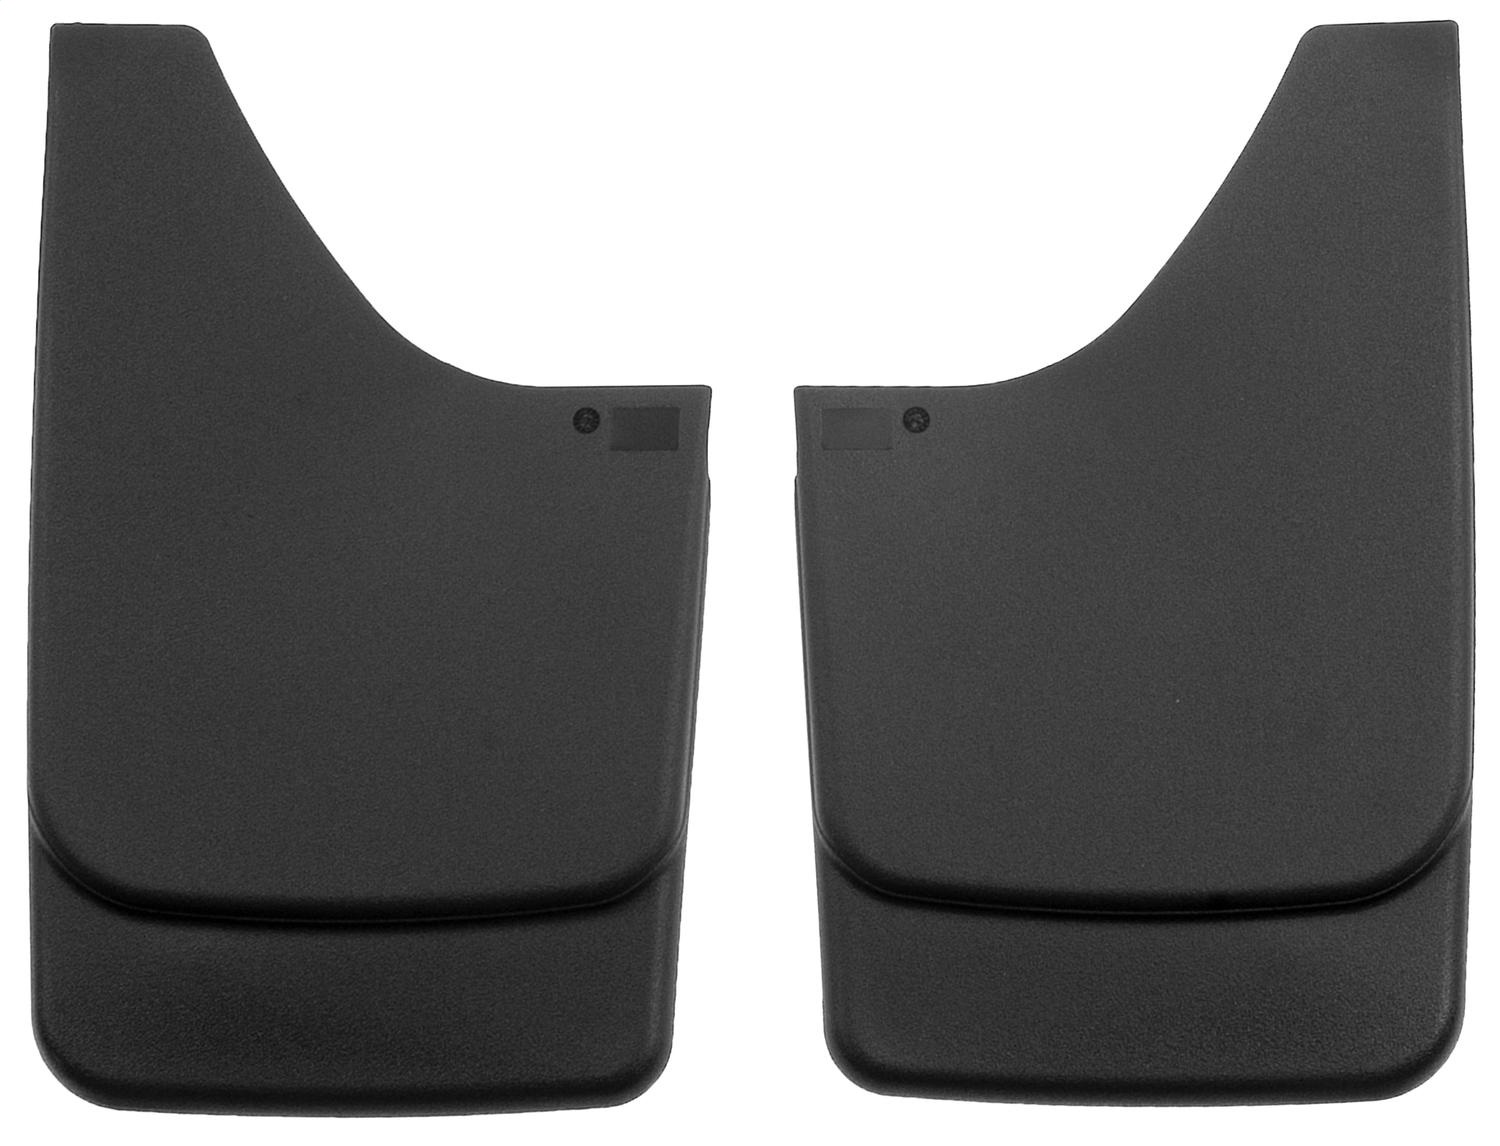 Husky Liners Husky Liners 56311 Custom Molded Mud Guards Fits Avalanche 1500 Avalanche 2500